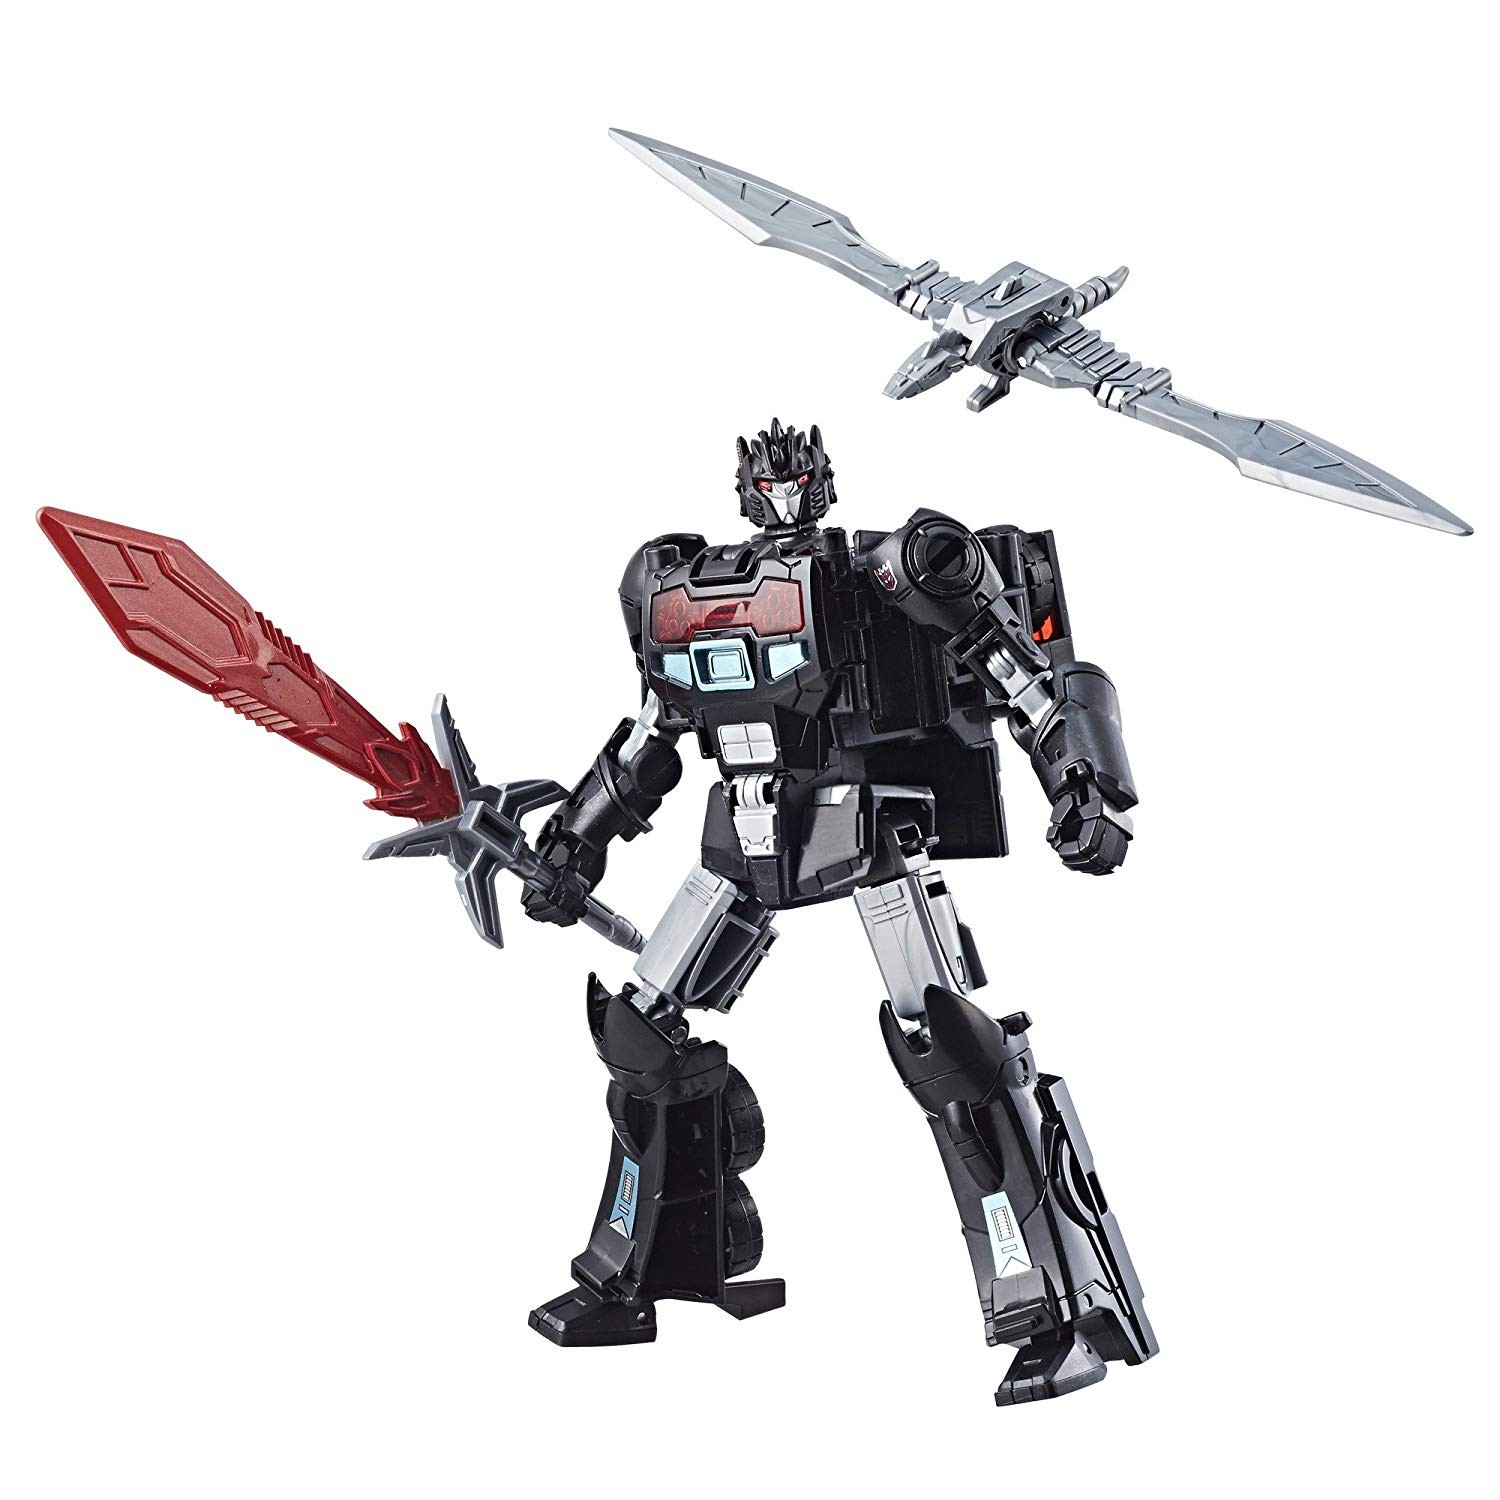 Transformers News: Transformers Power of the Primes Nemesis Prime Confirmed to be a Prime Day Item